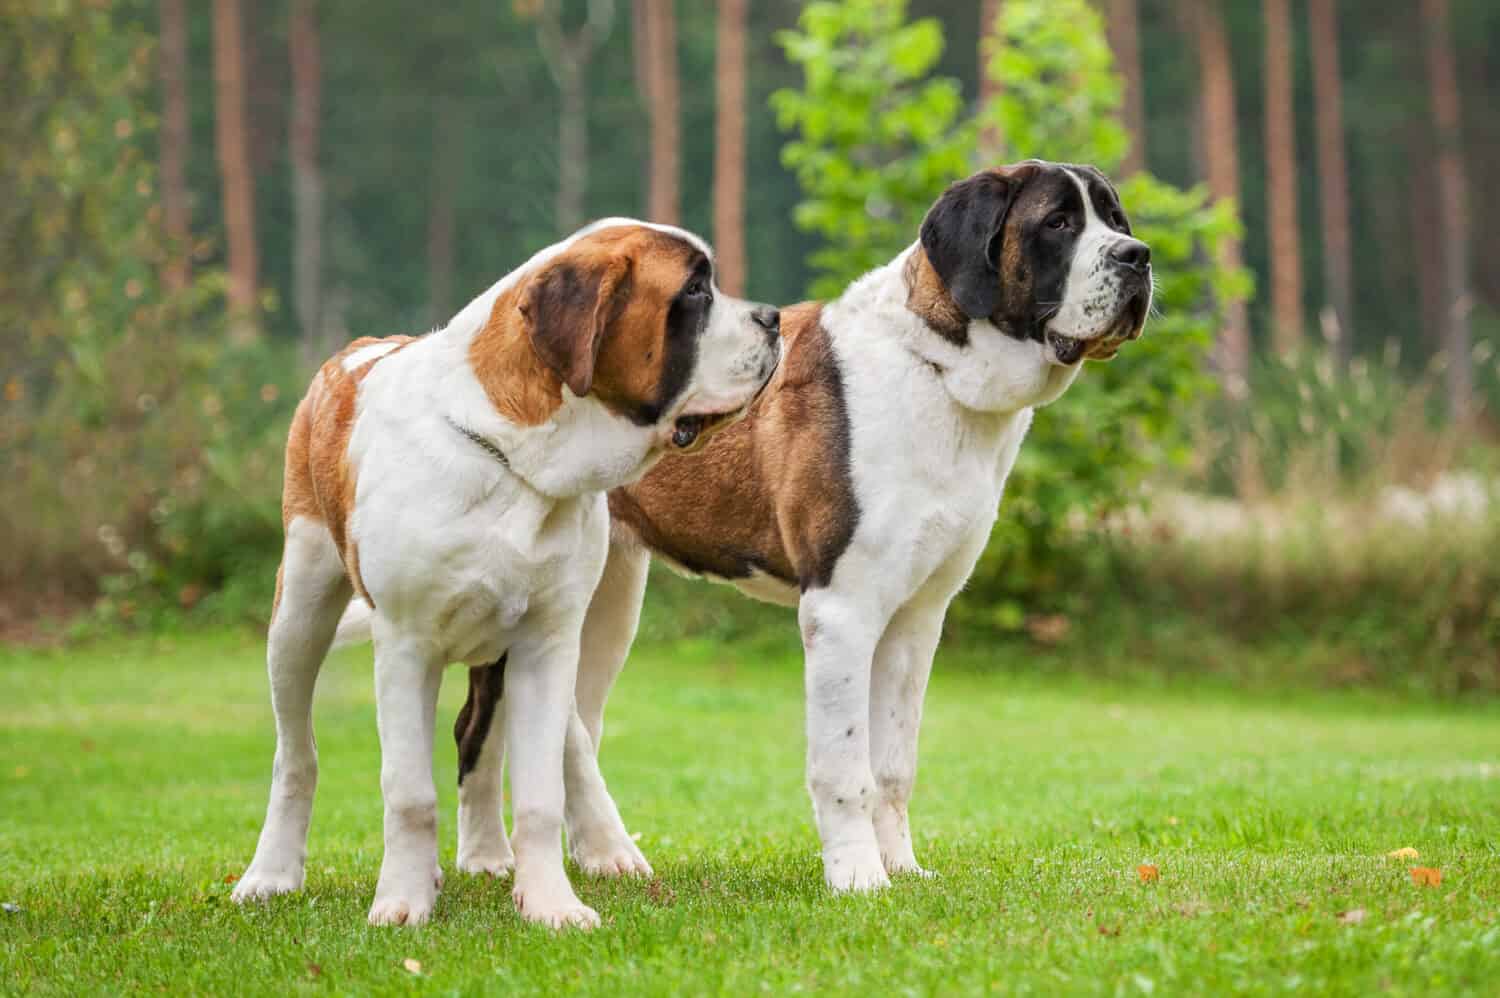 Two short-haired saint bernard dogs standing on the lawn